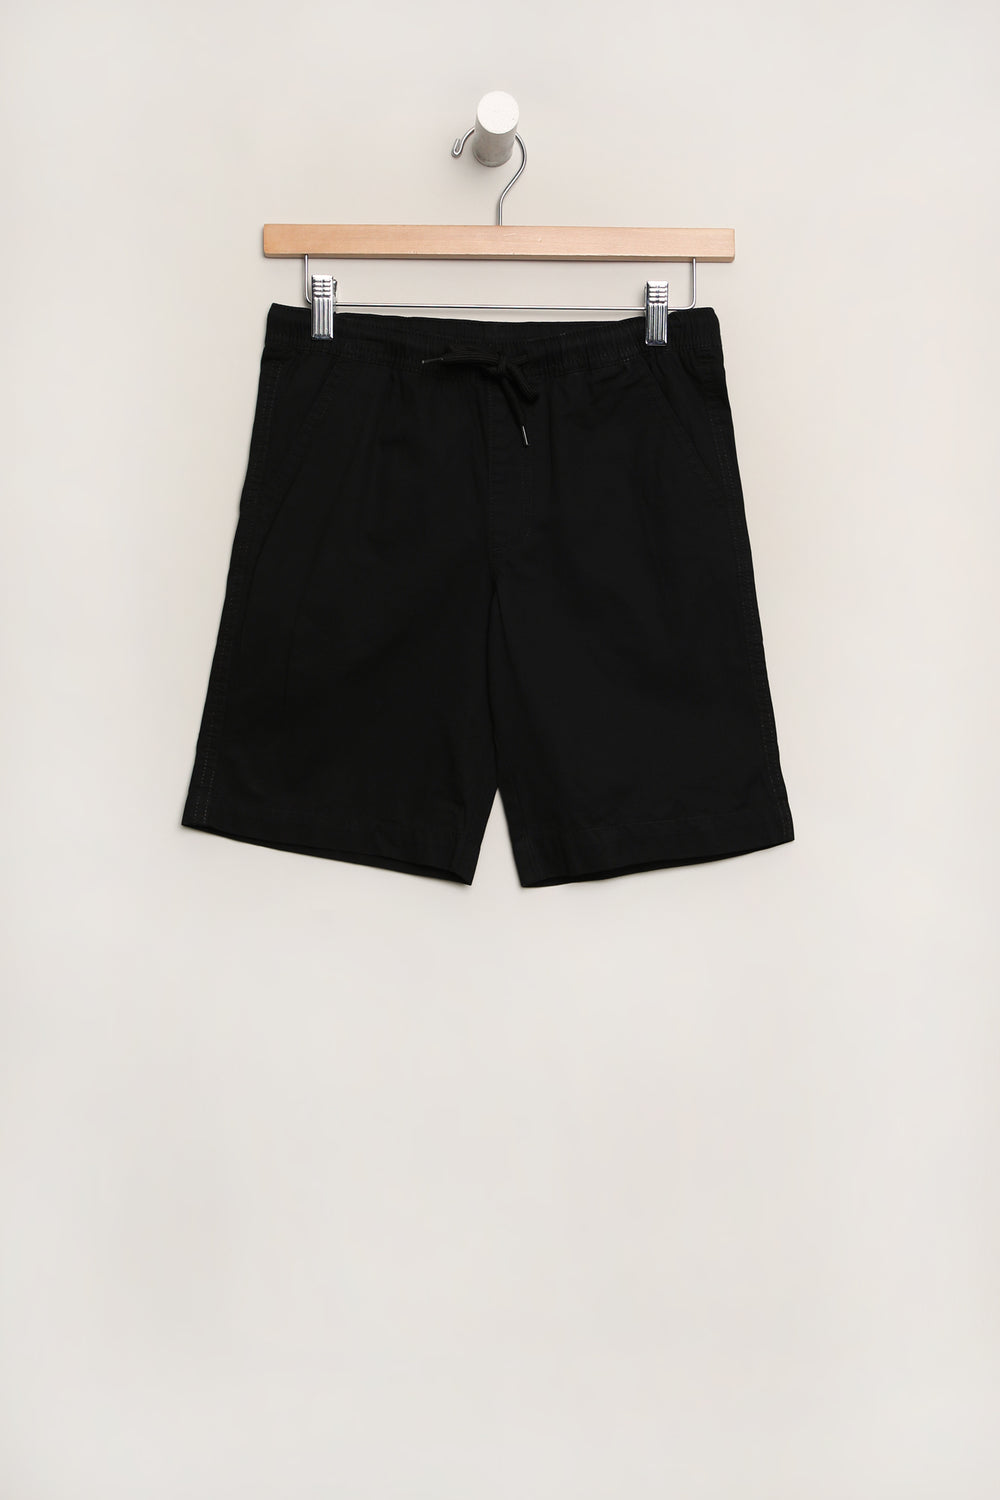 West49 Youth Twill Jogger Shorts West49 Youth Twill Jogger Shorts